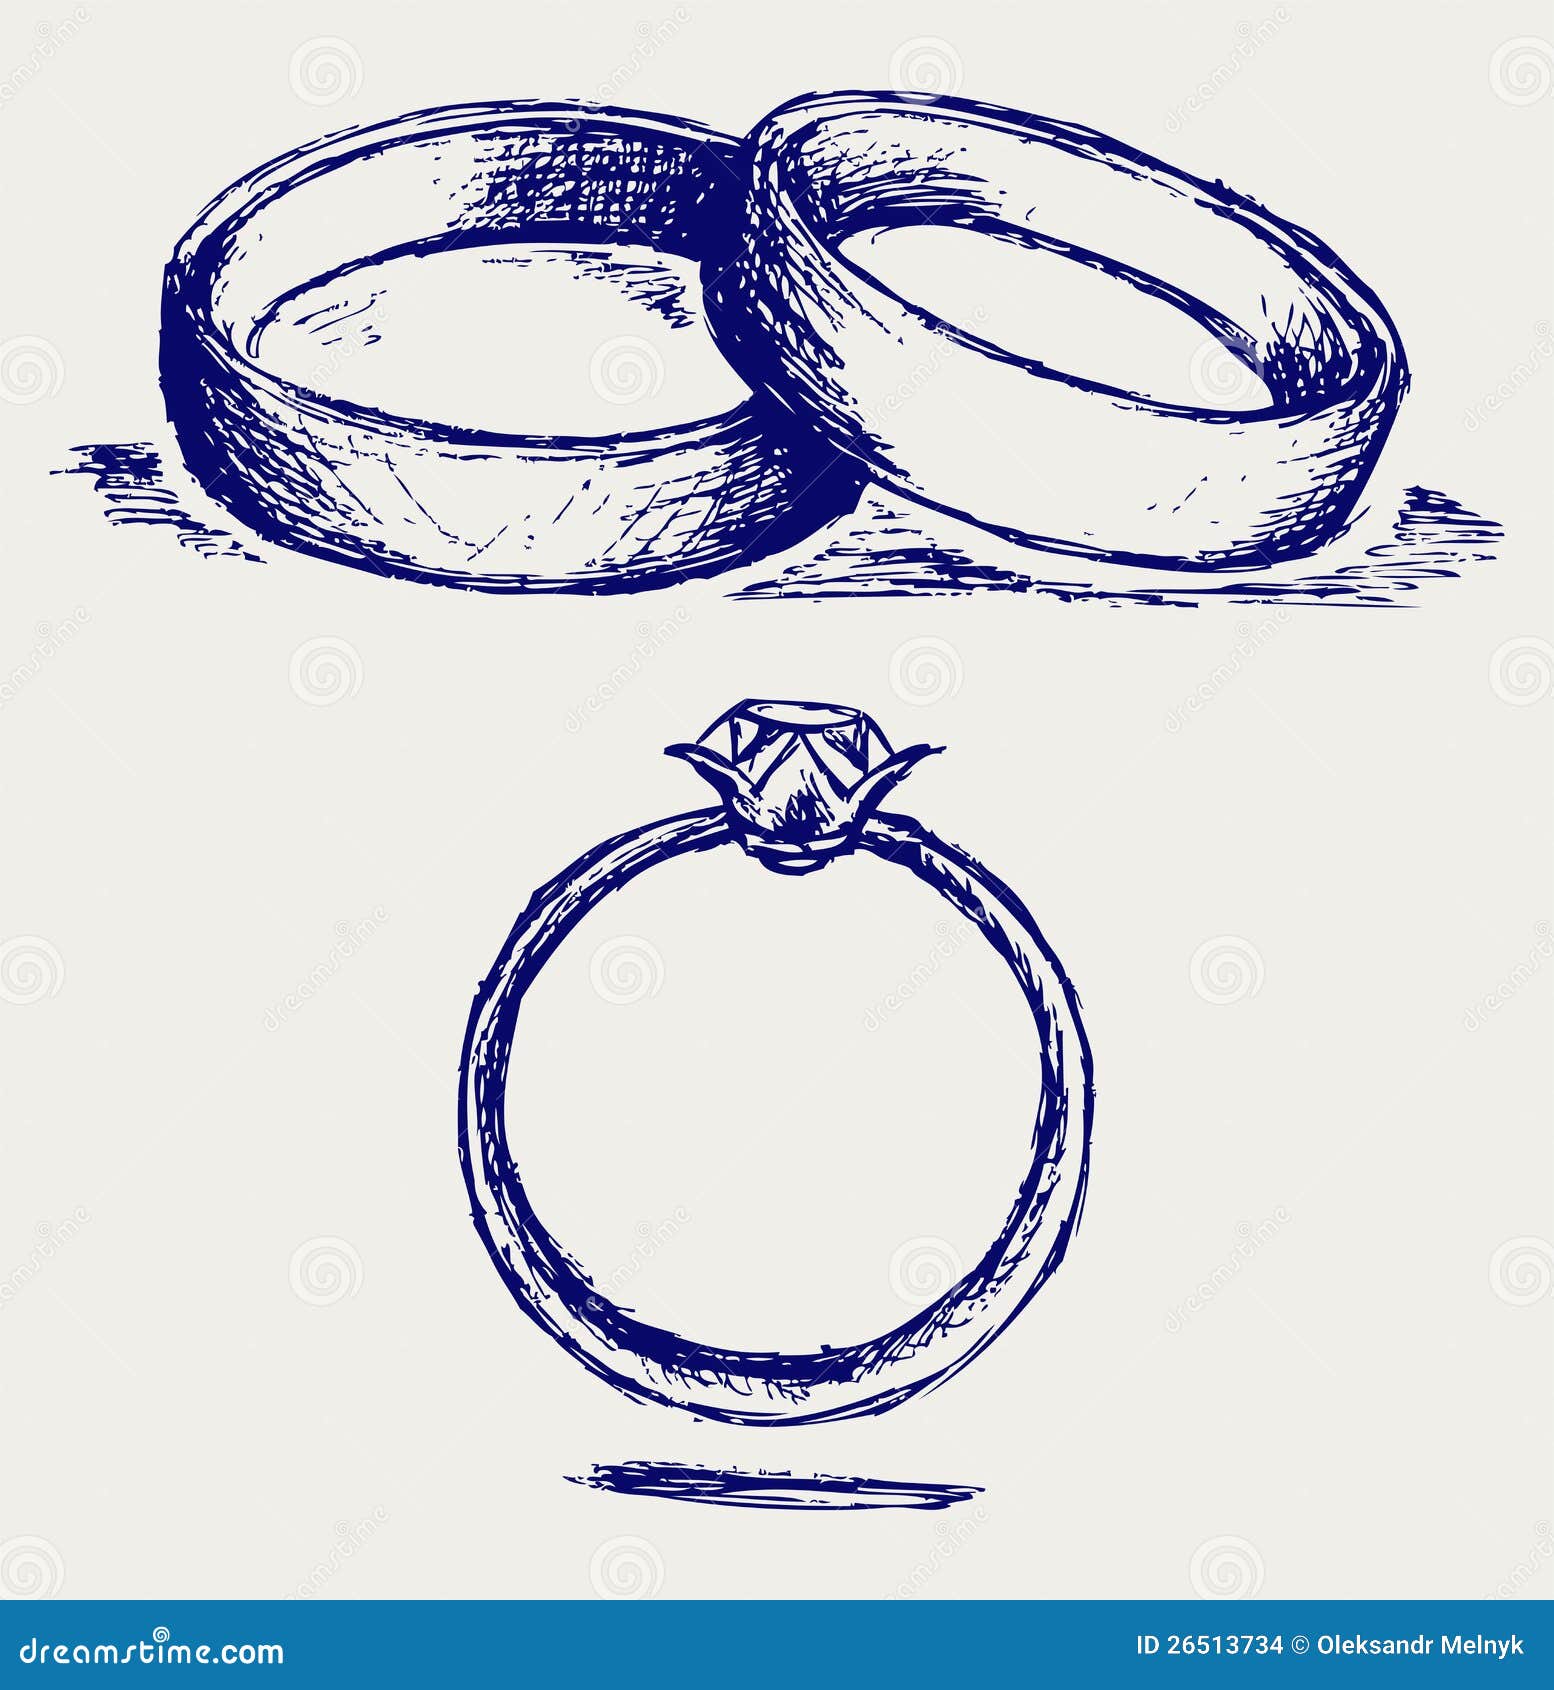 Pencil sketch of a championship ring] | Texas Disability History Collection